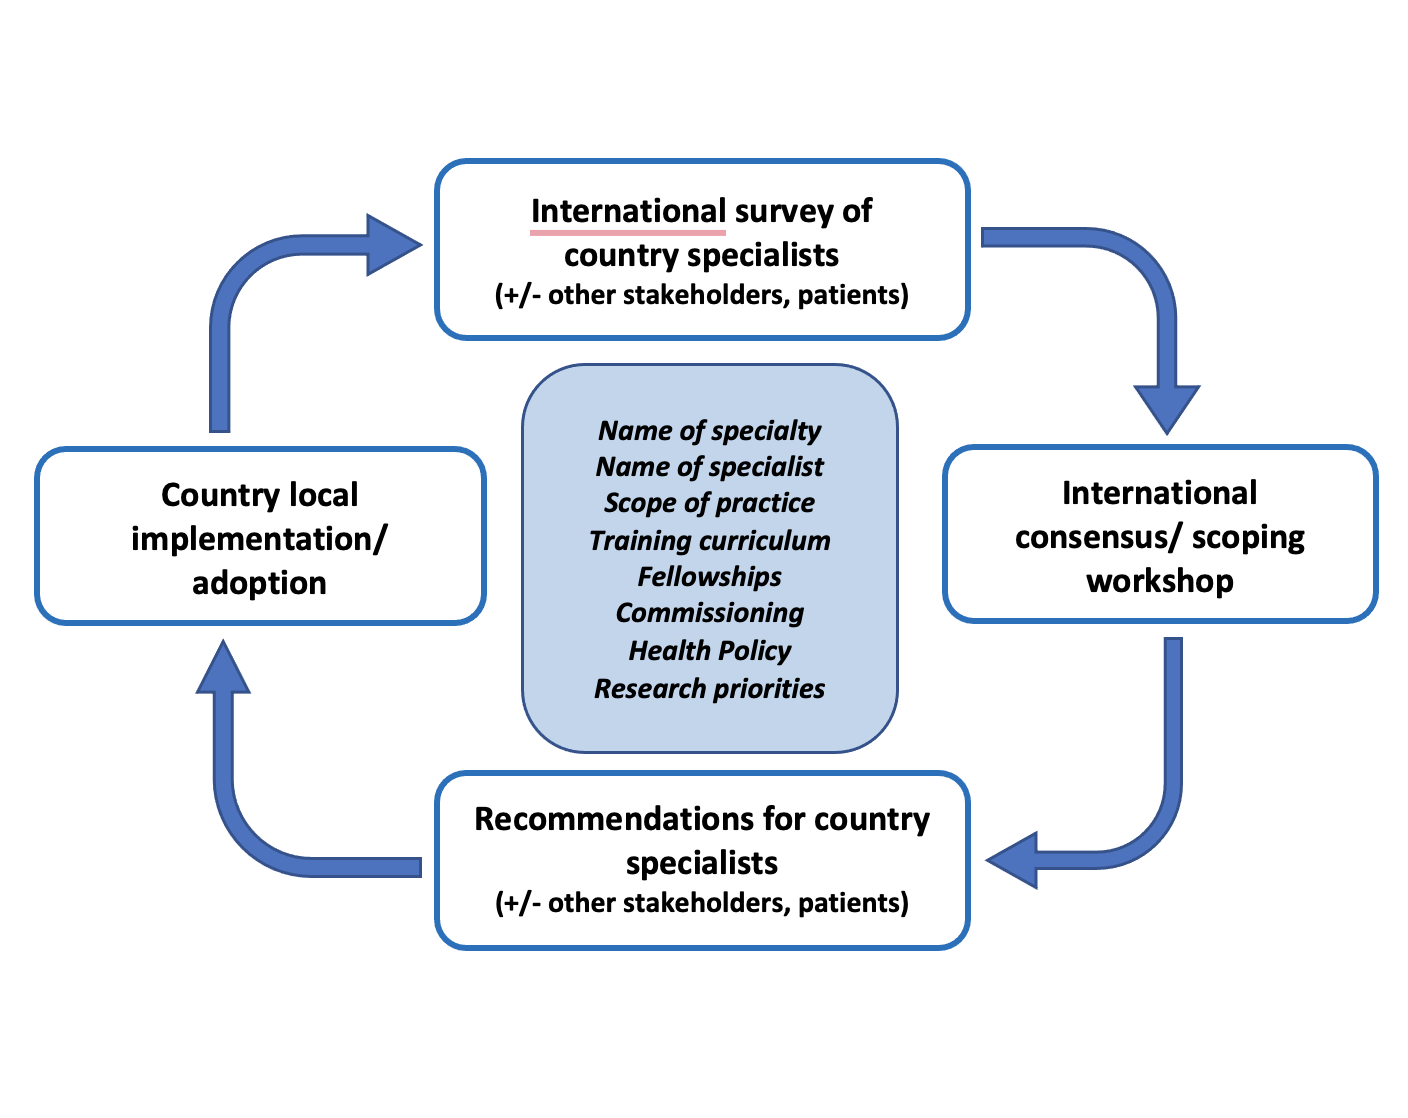 Adv RSP Editorial: The INFORM (International Framework for Rehabilitation Medics) Project to Strengthen the Medical Specialty